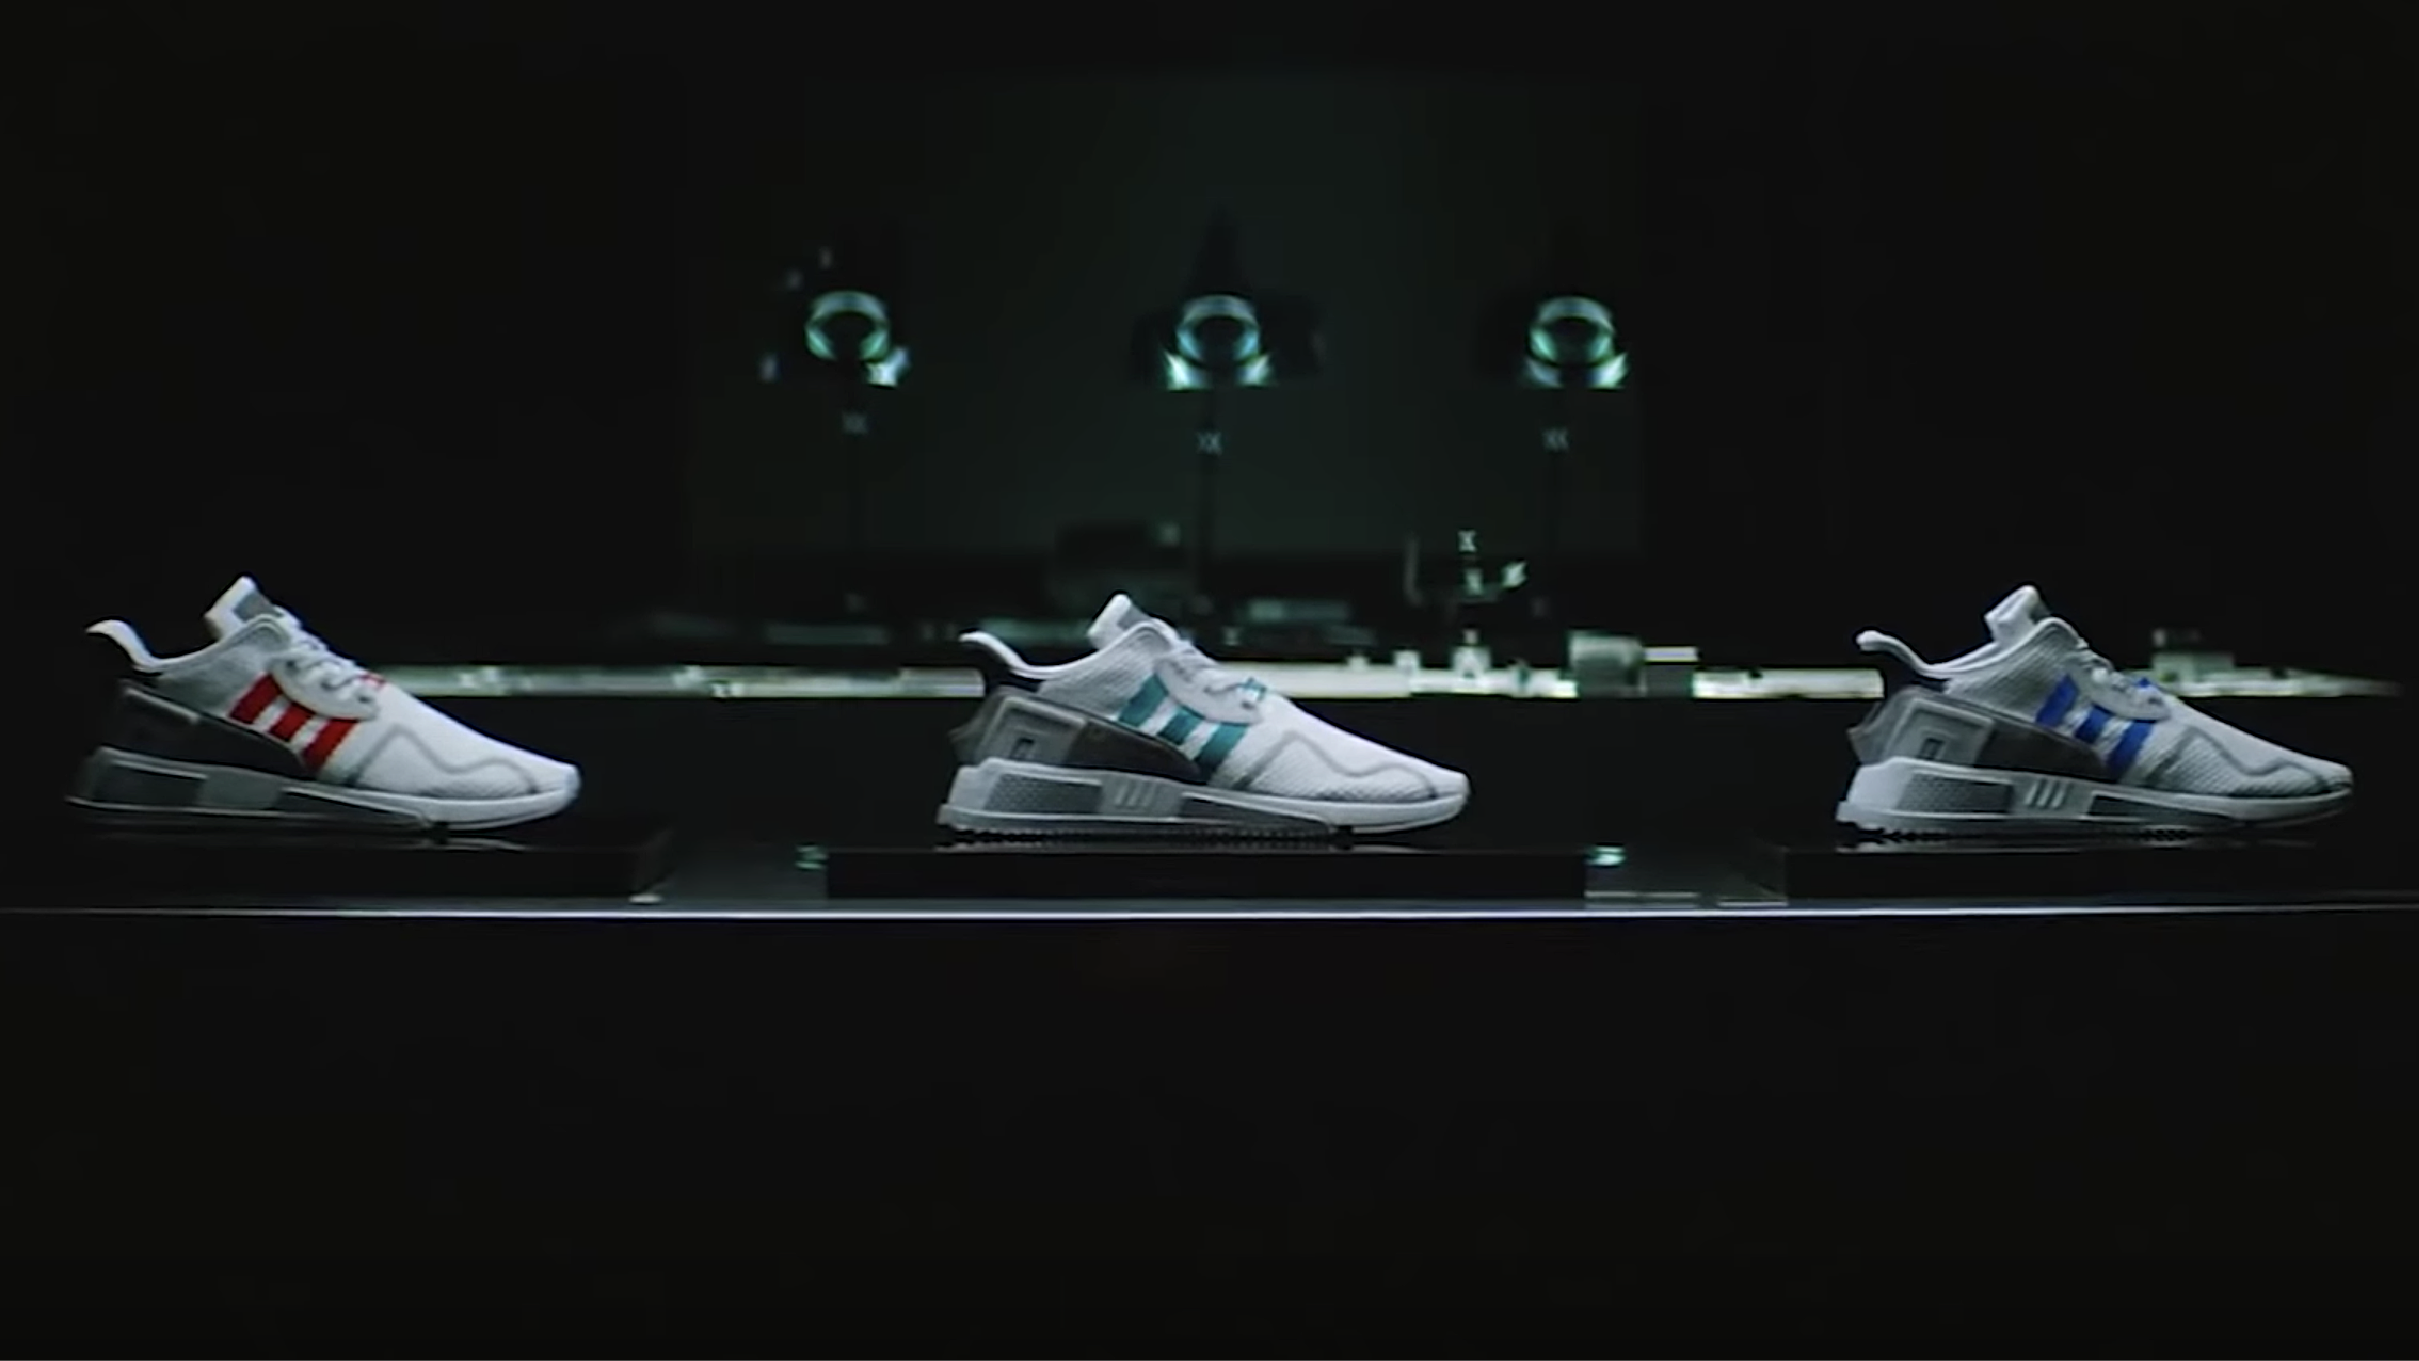 video campaign from the Adidas marketing team - Think with Google